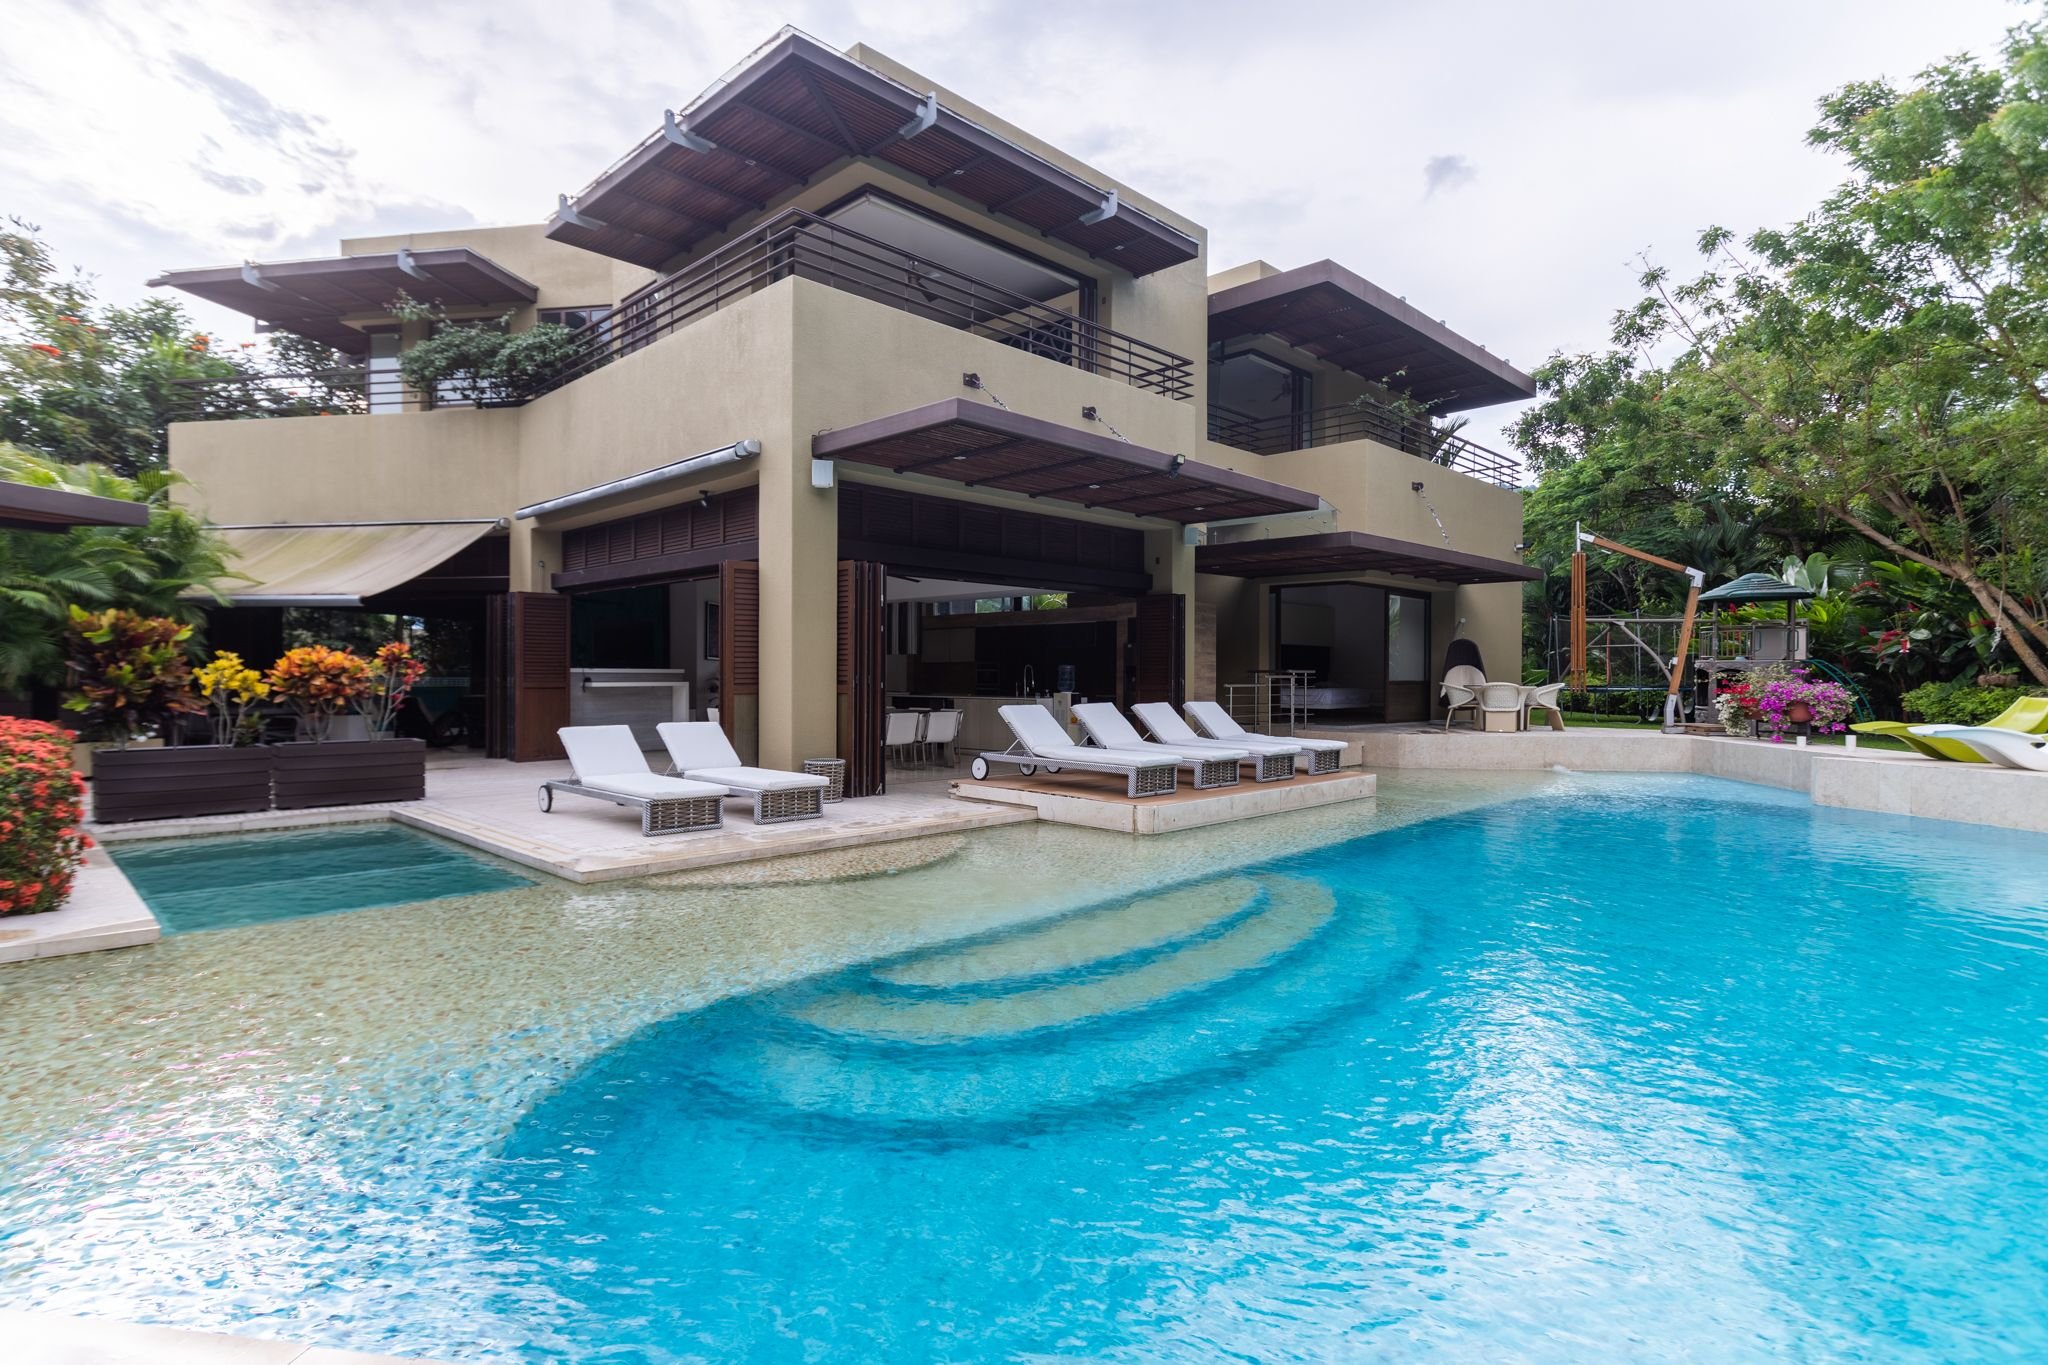 Property Image 1 - Captivating Villa with Huge Pool set in Lovely Garden